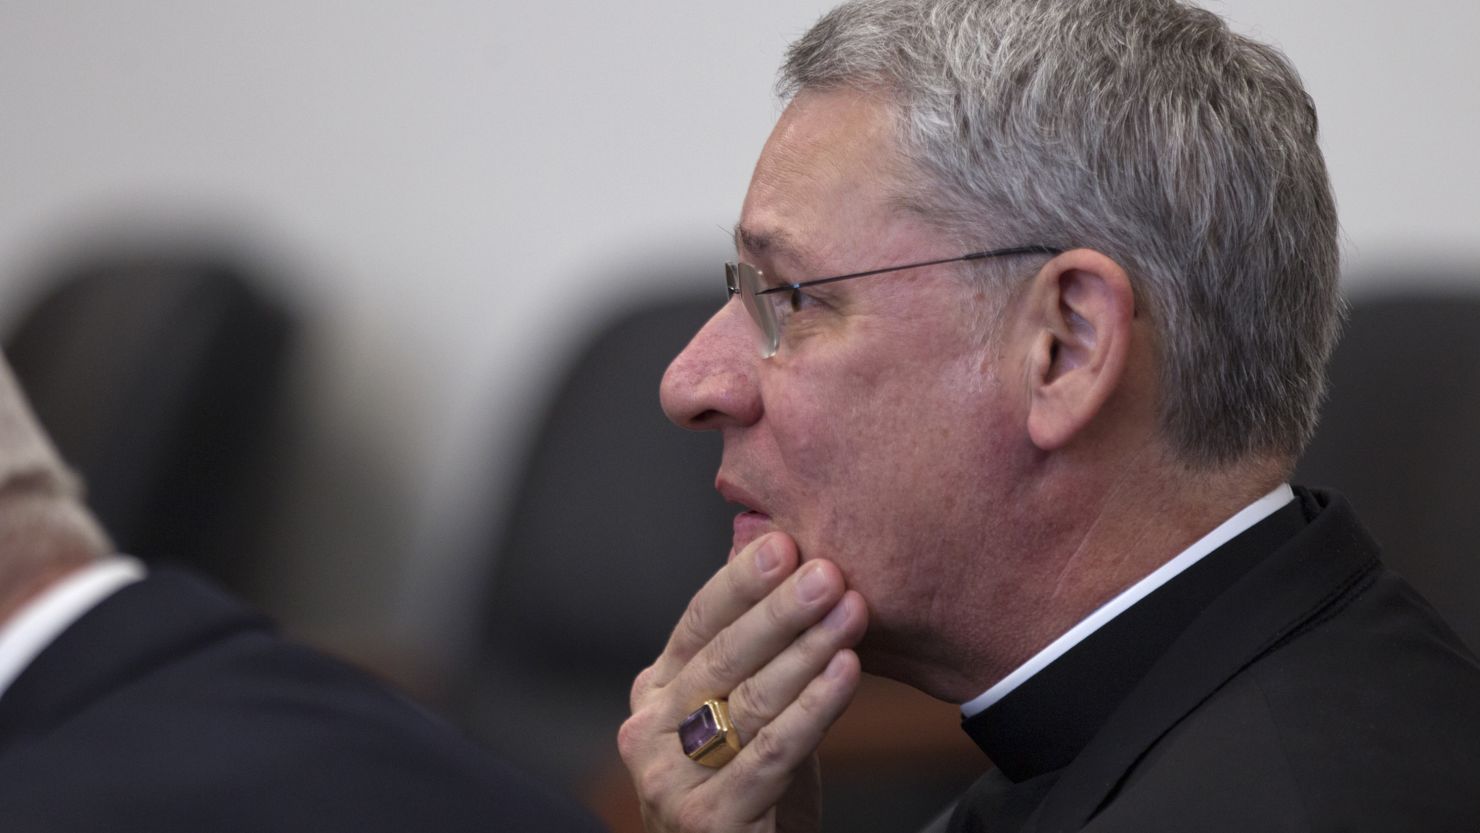 Bishop Robert Finn was sentenced to two years probation for failure to report suspected child abuse.
